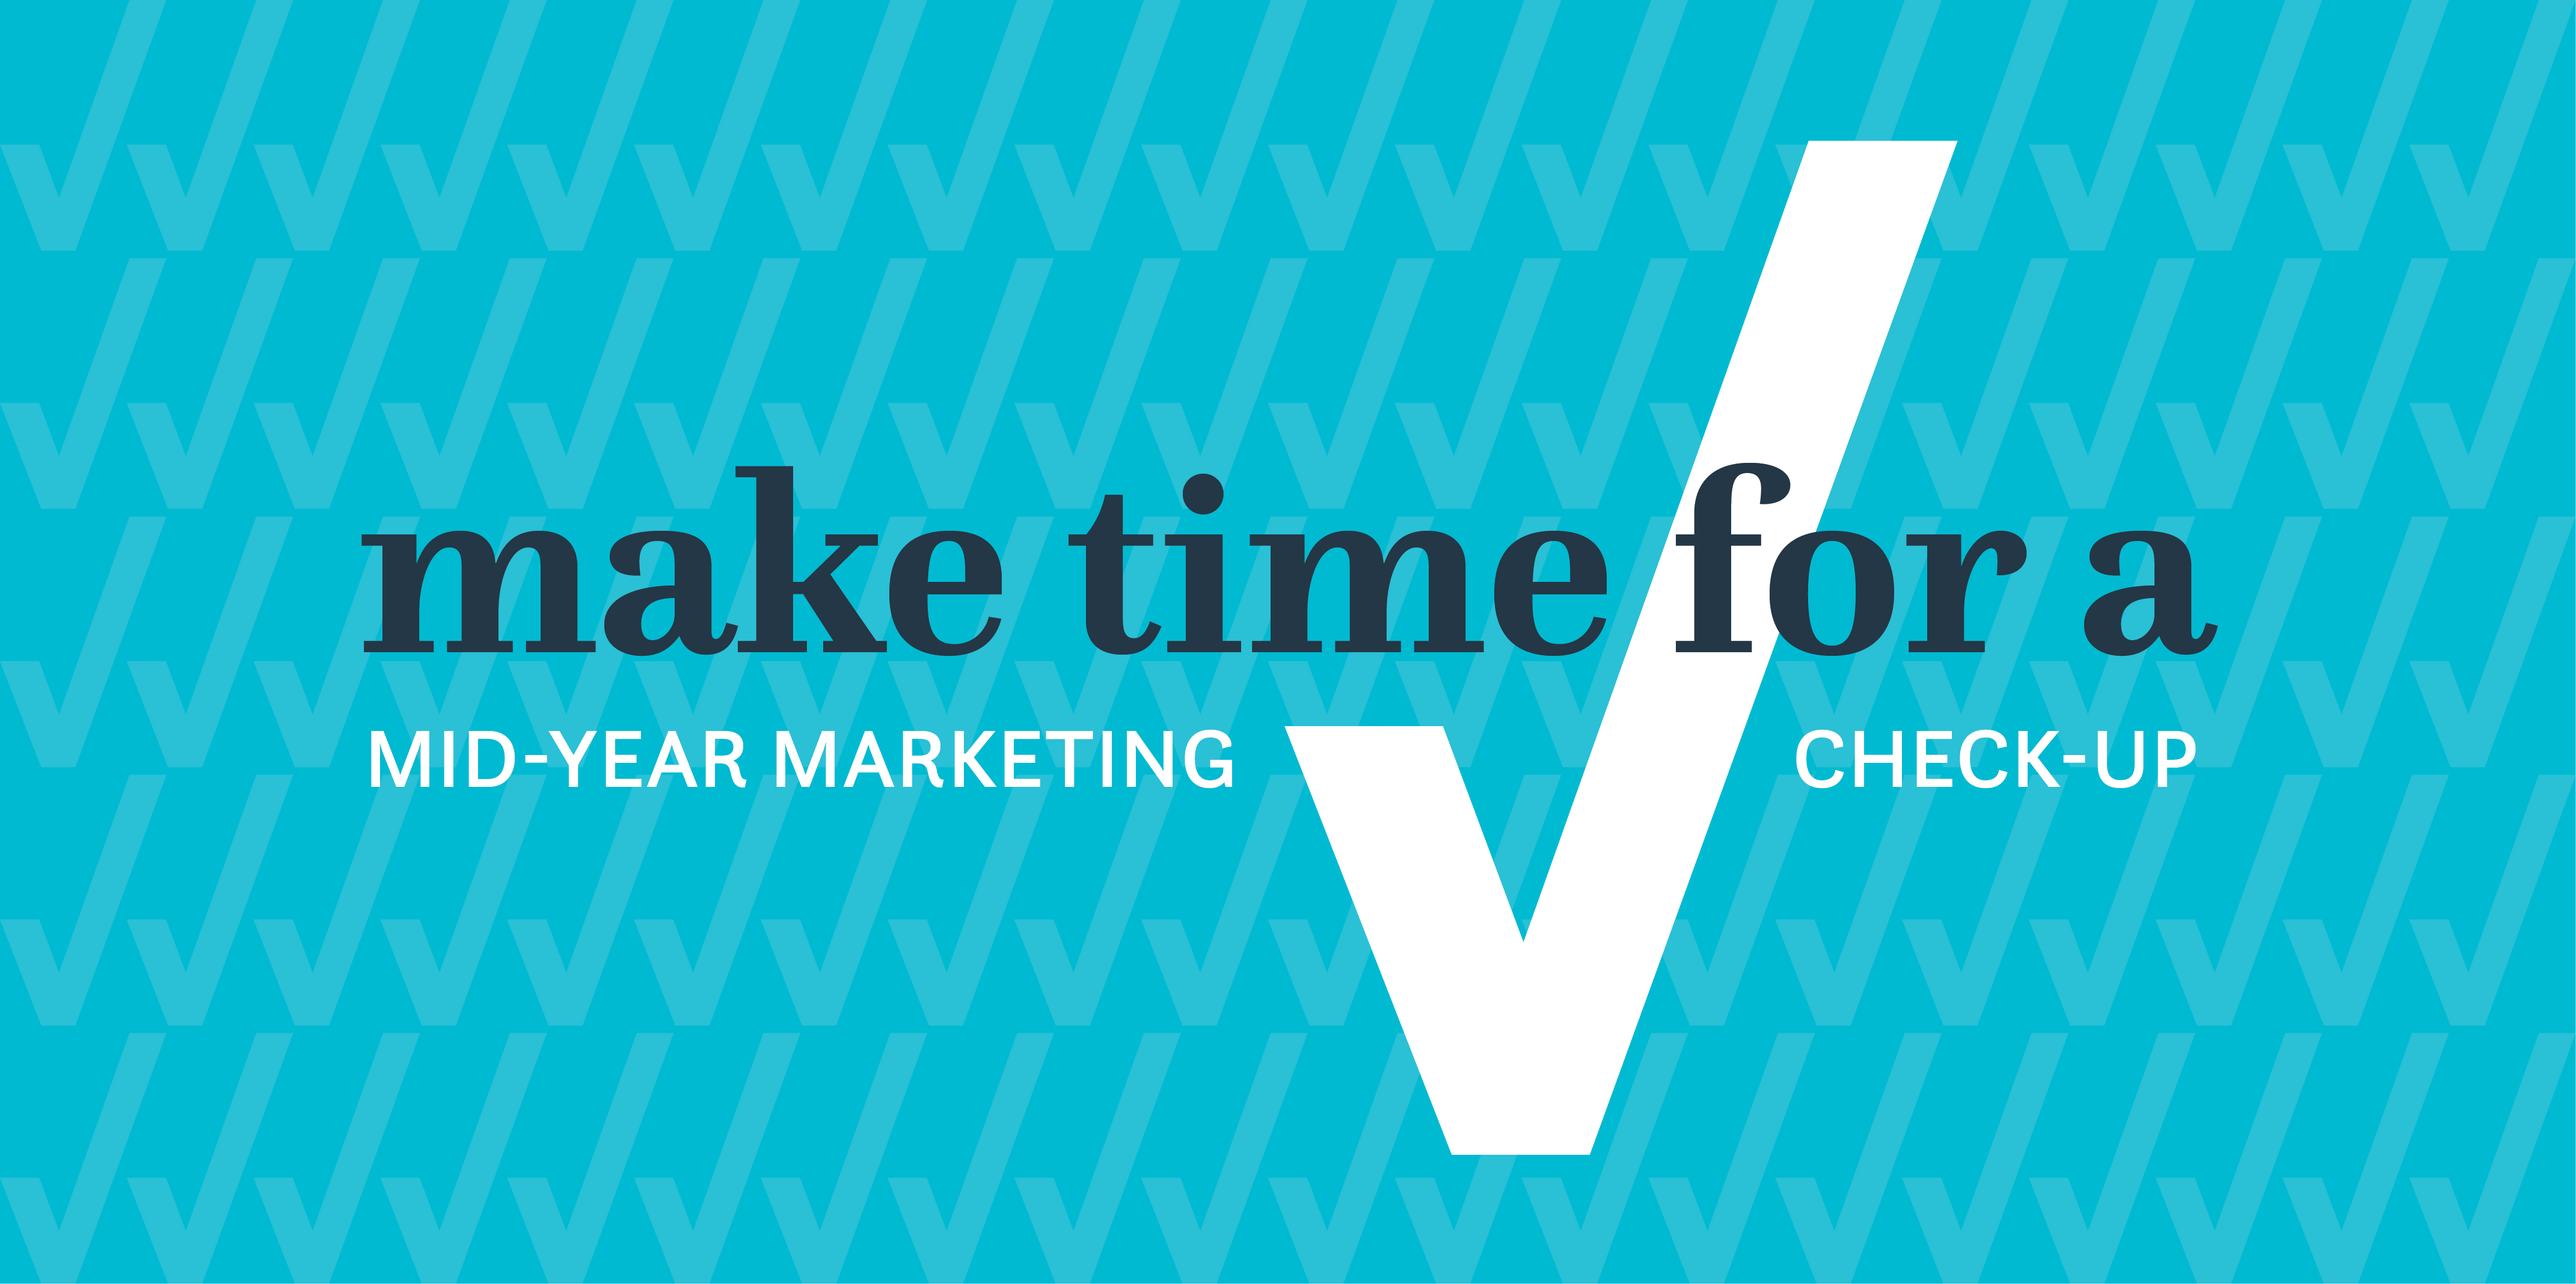 Make Time For A Mid-Year Marketing Check-Up